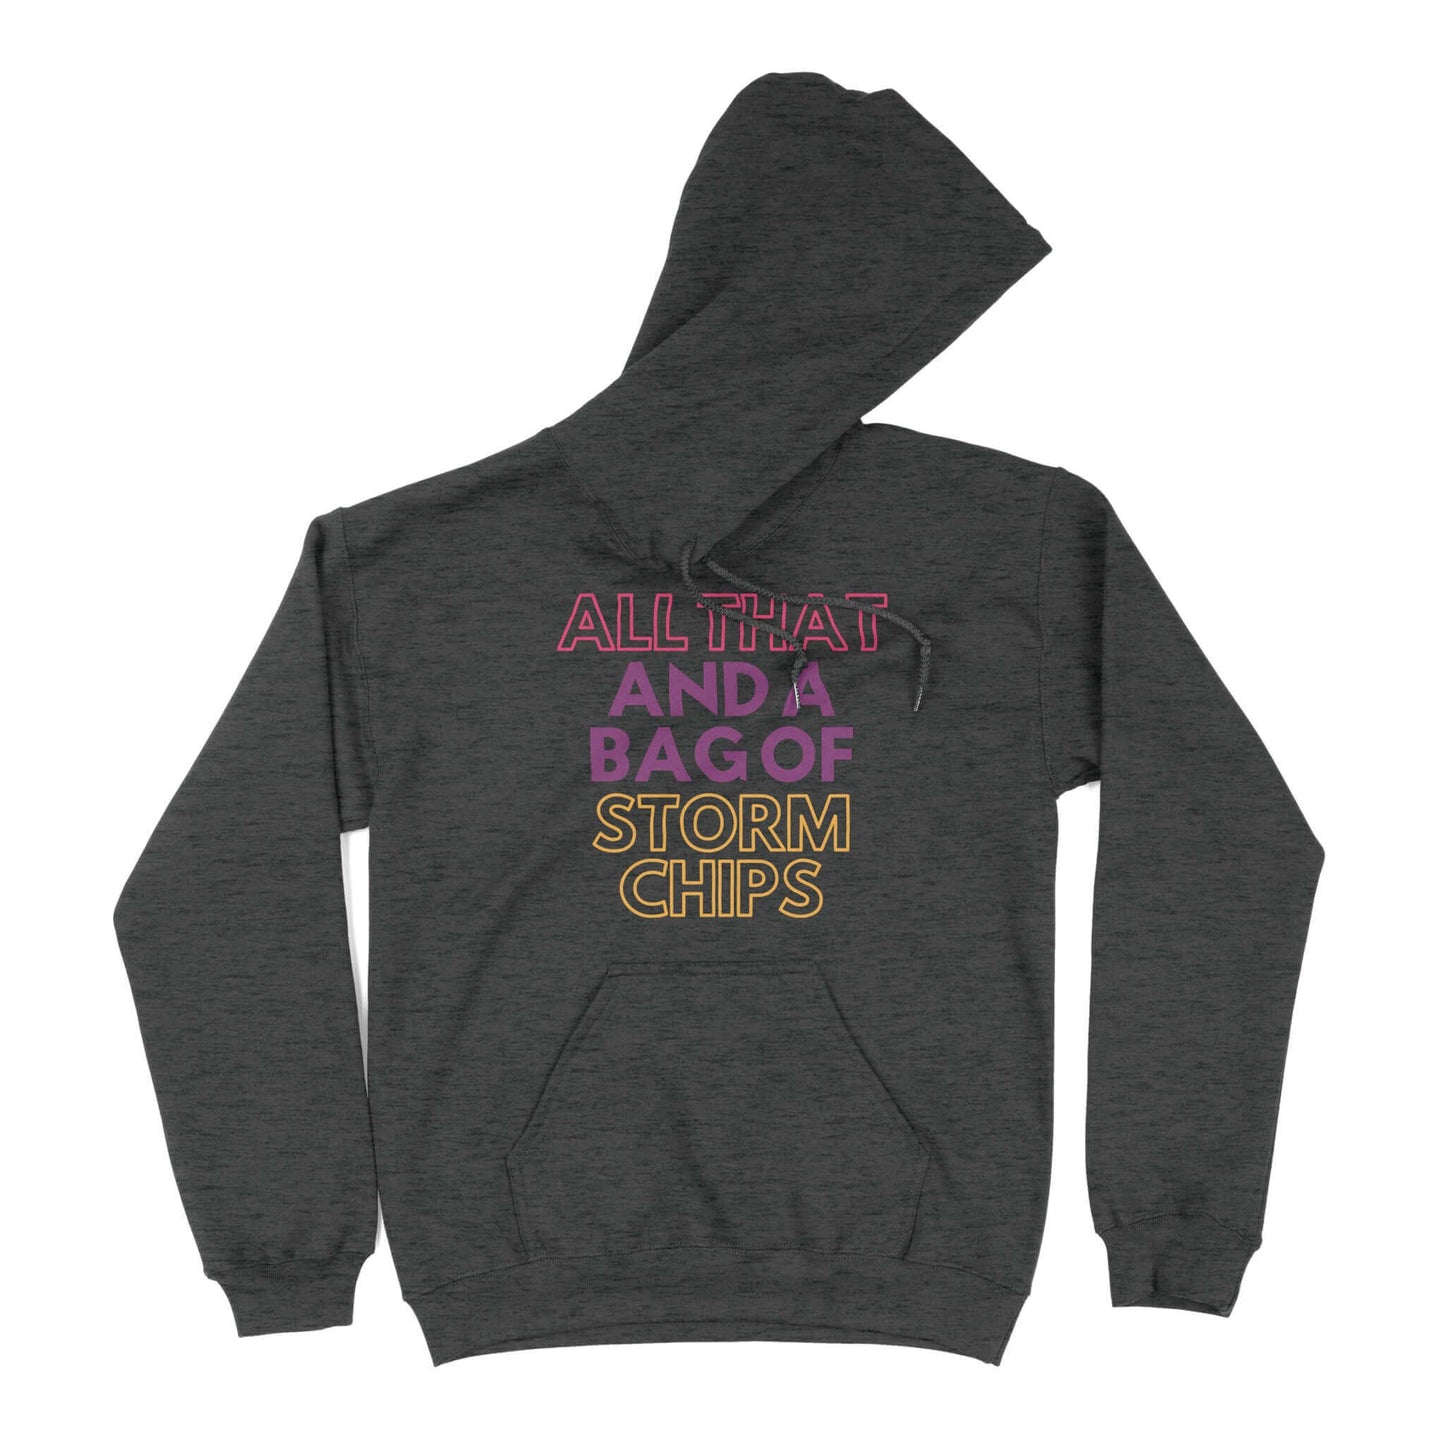 All That and a Bag of Storm Chips Unisex Hoodie in Color: Dark Heather - East Coast AF Apparel